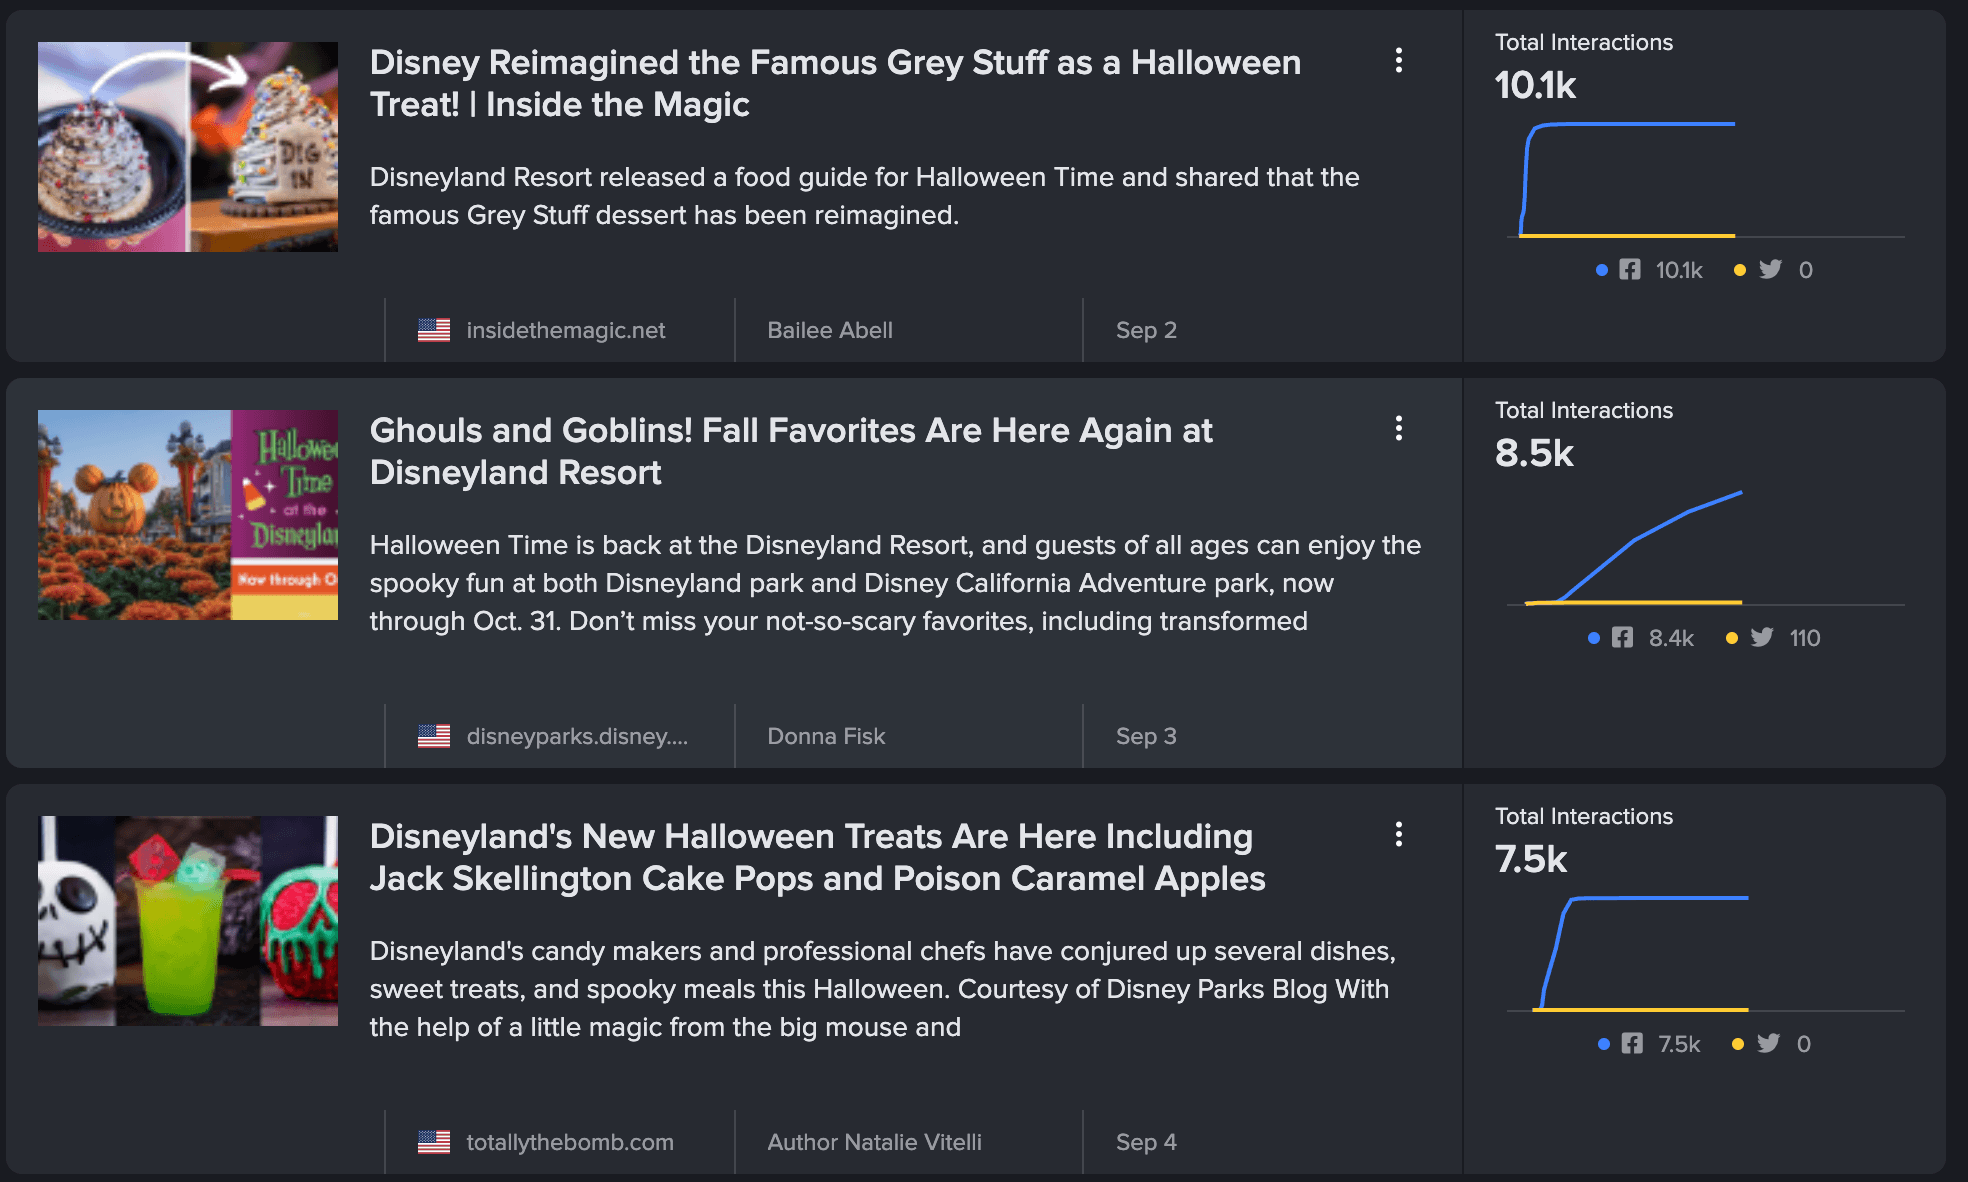 Screenshot of the top stories about Halloween and Disney from NewWhip Spike